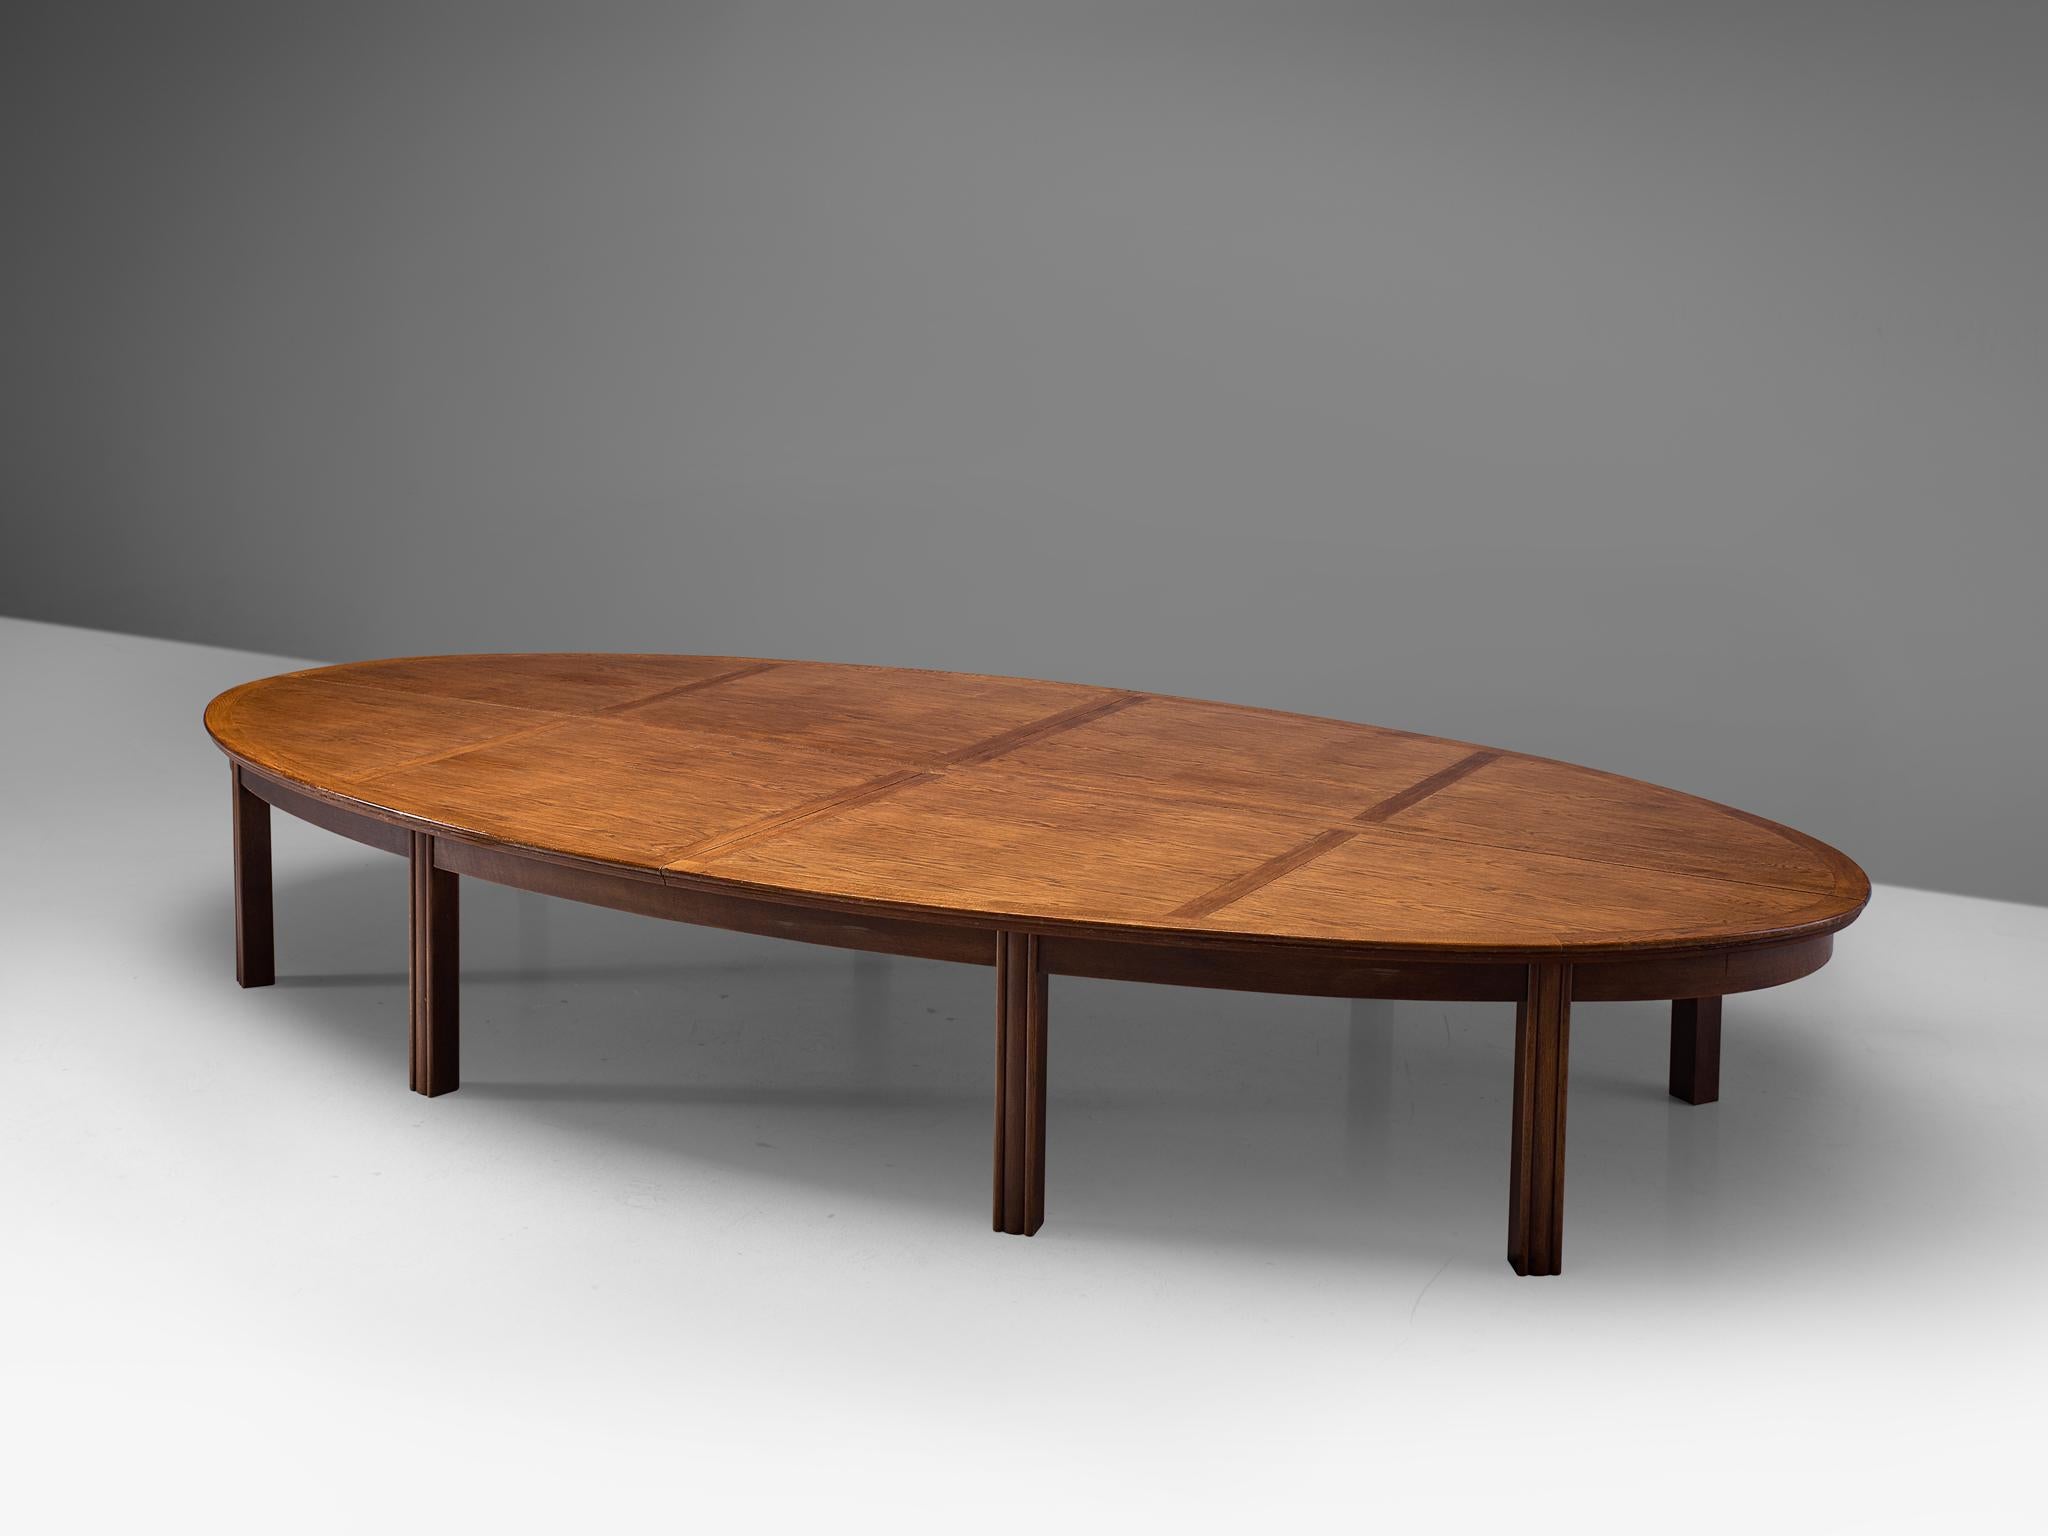 Conference table, oak, the Netherlands, 1950s.

Beautiful aged large conference or dining table in Art Deco style. The oval shaped tabletop has a width of 5mtr/39.4in and rests on eight straight, robust legs. The characteristic grain and pattern